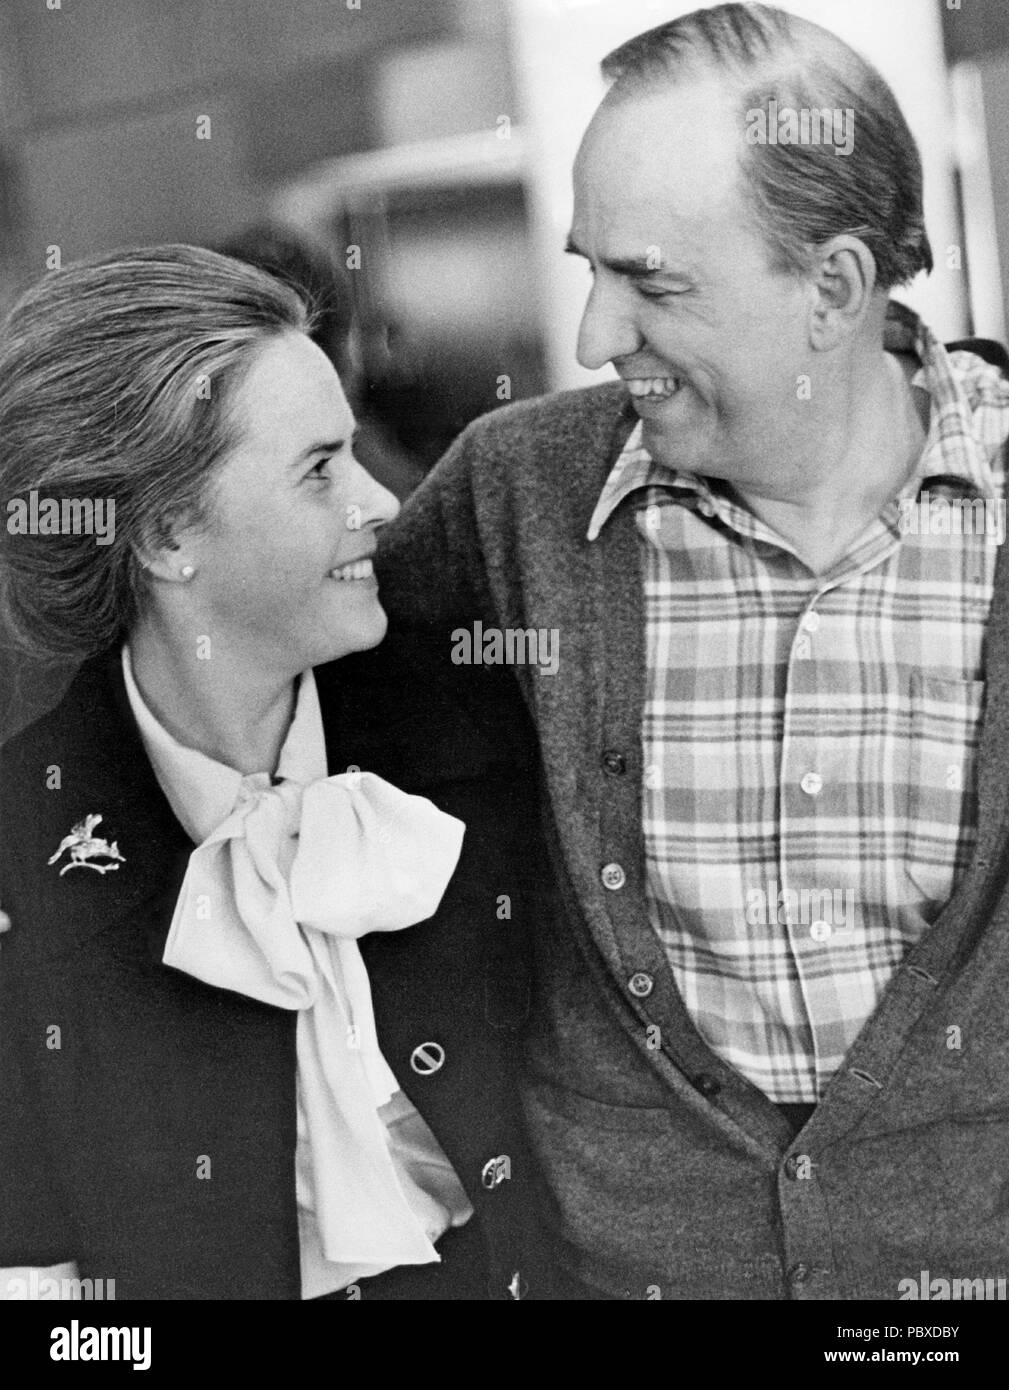 Ingmar Bergman. 1918-2007.  Swedish film director. Pictured here  in Oslo Norway 1977 in connection with the presentation of his film Autumn Sonata which he wrote and directed. Here together with his wife Ingrid von Rosen. The film was shot in a film studio in Oslo and the dialoge and most of the crew and actors were Swedish. The film had it's premiere on October 8 1978. Stock Photo